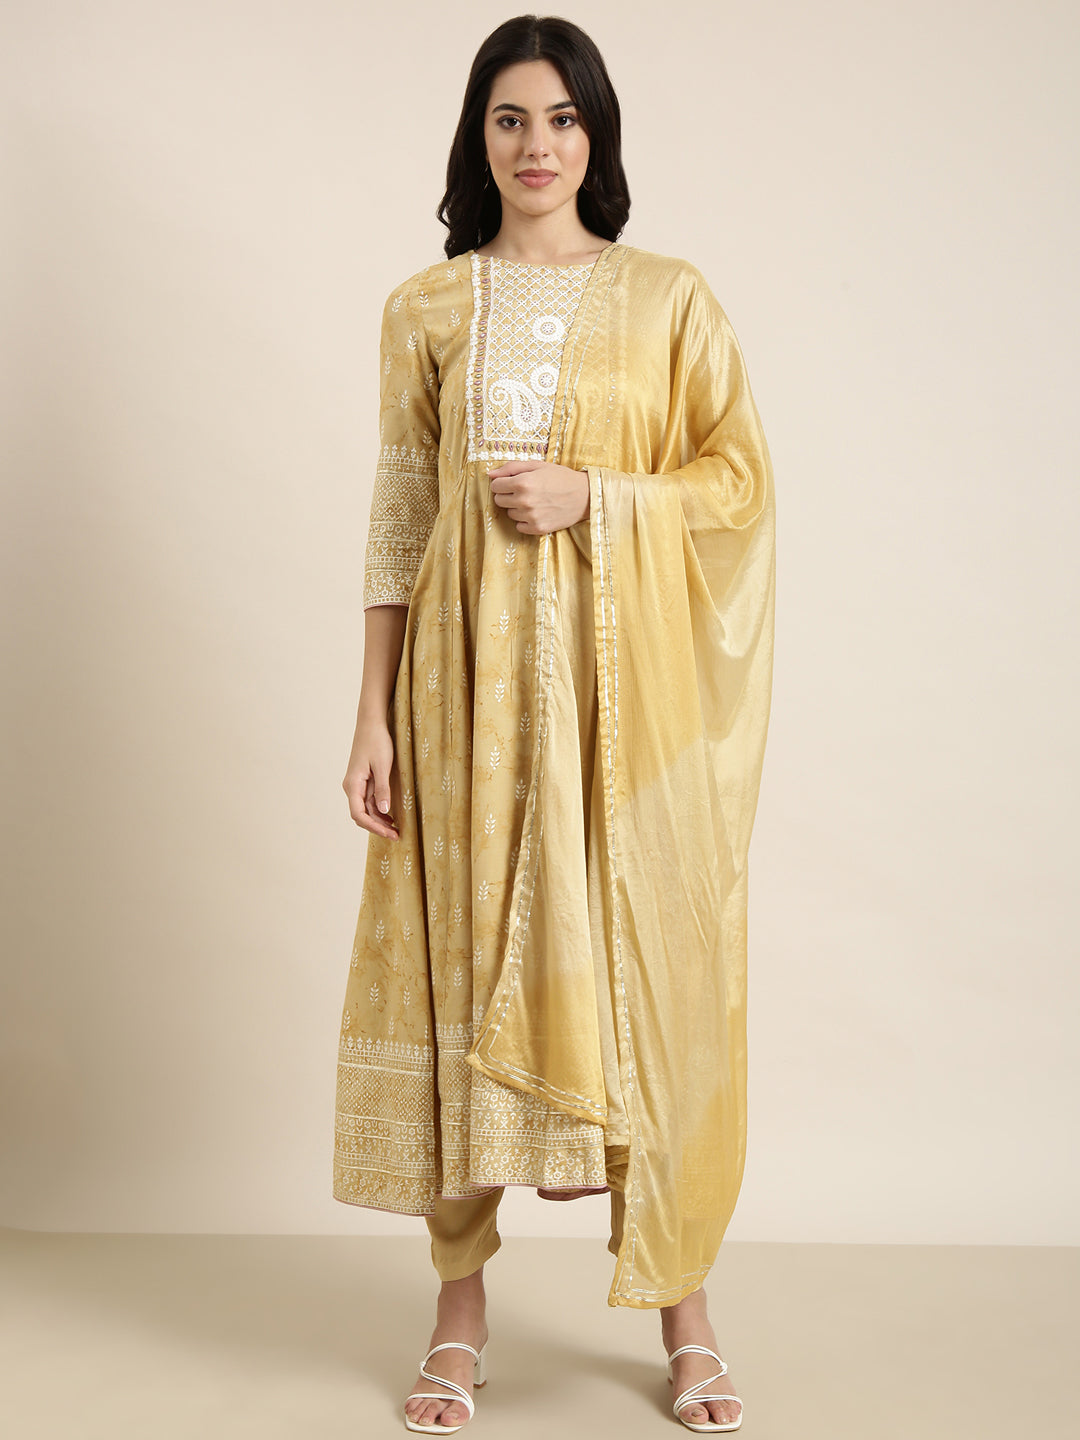 Women Anarkali Beige Floral Kurta and Trousers Set Comes With Dupatta